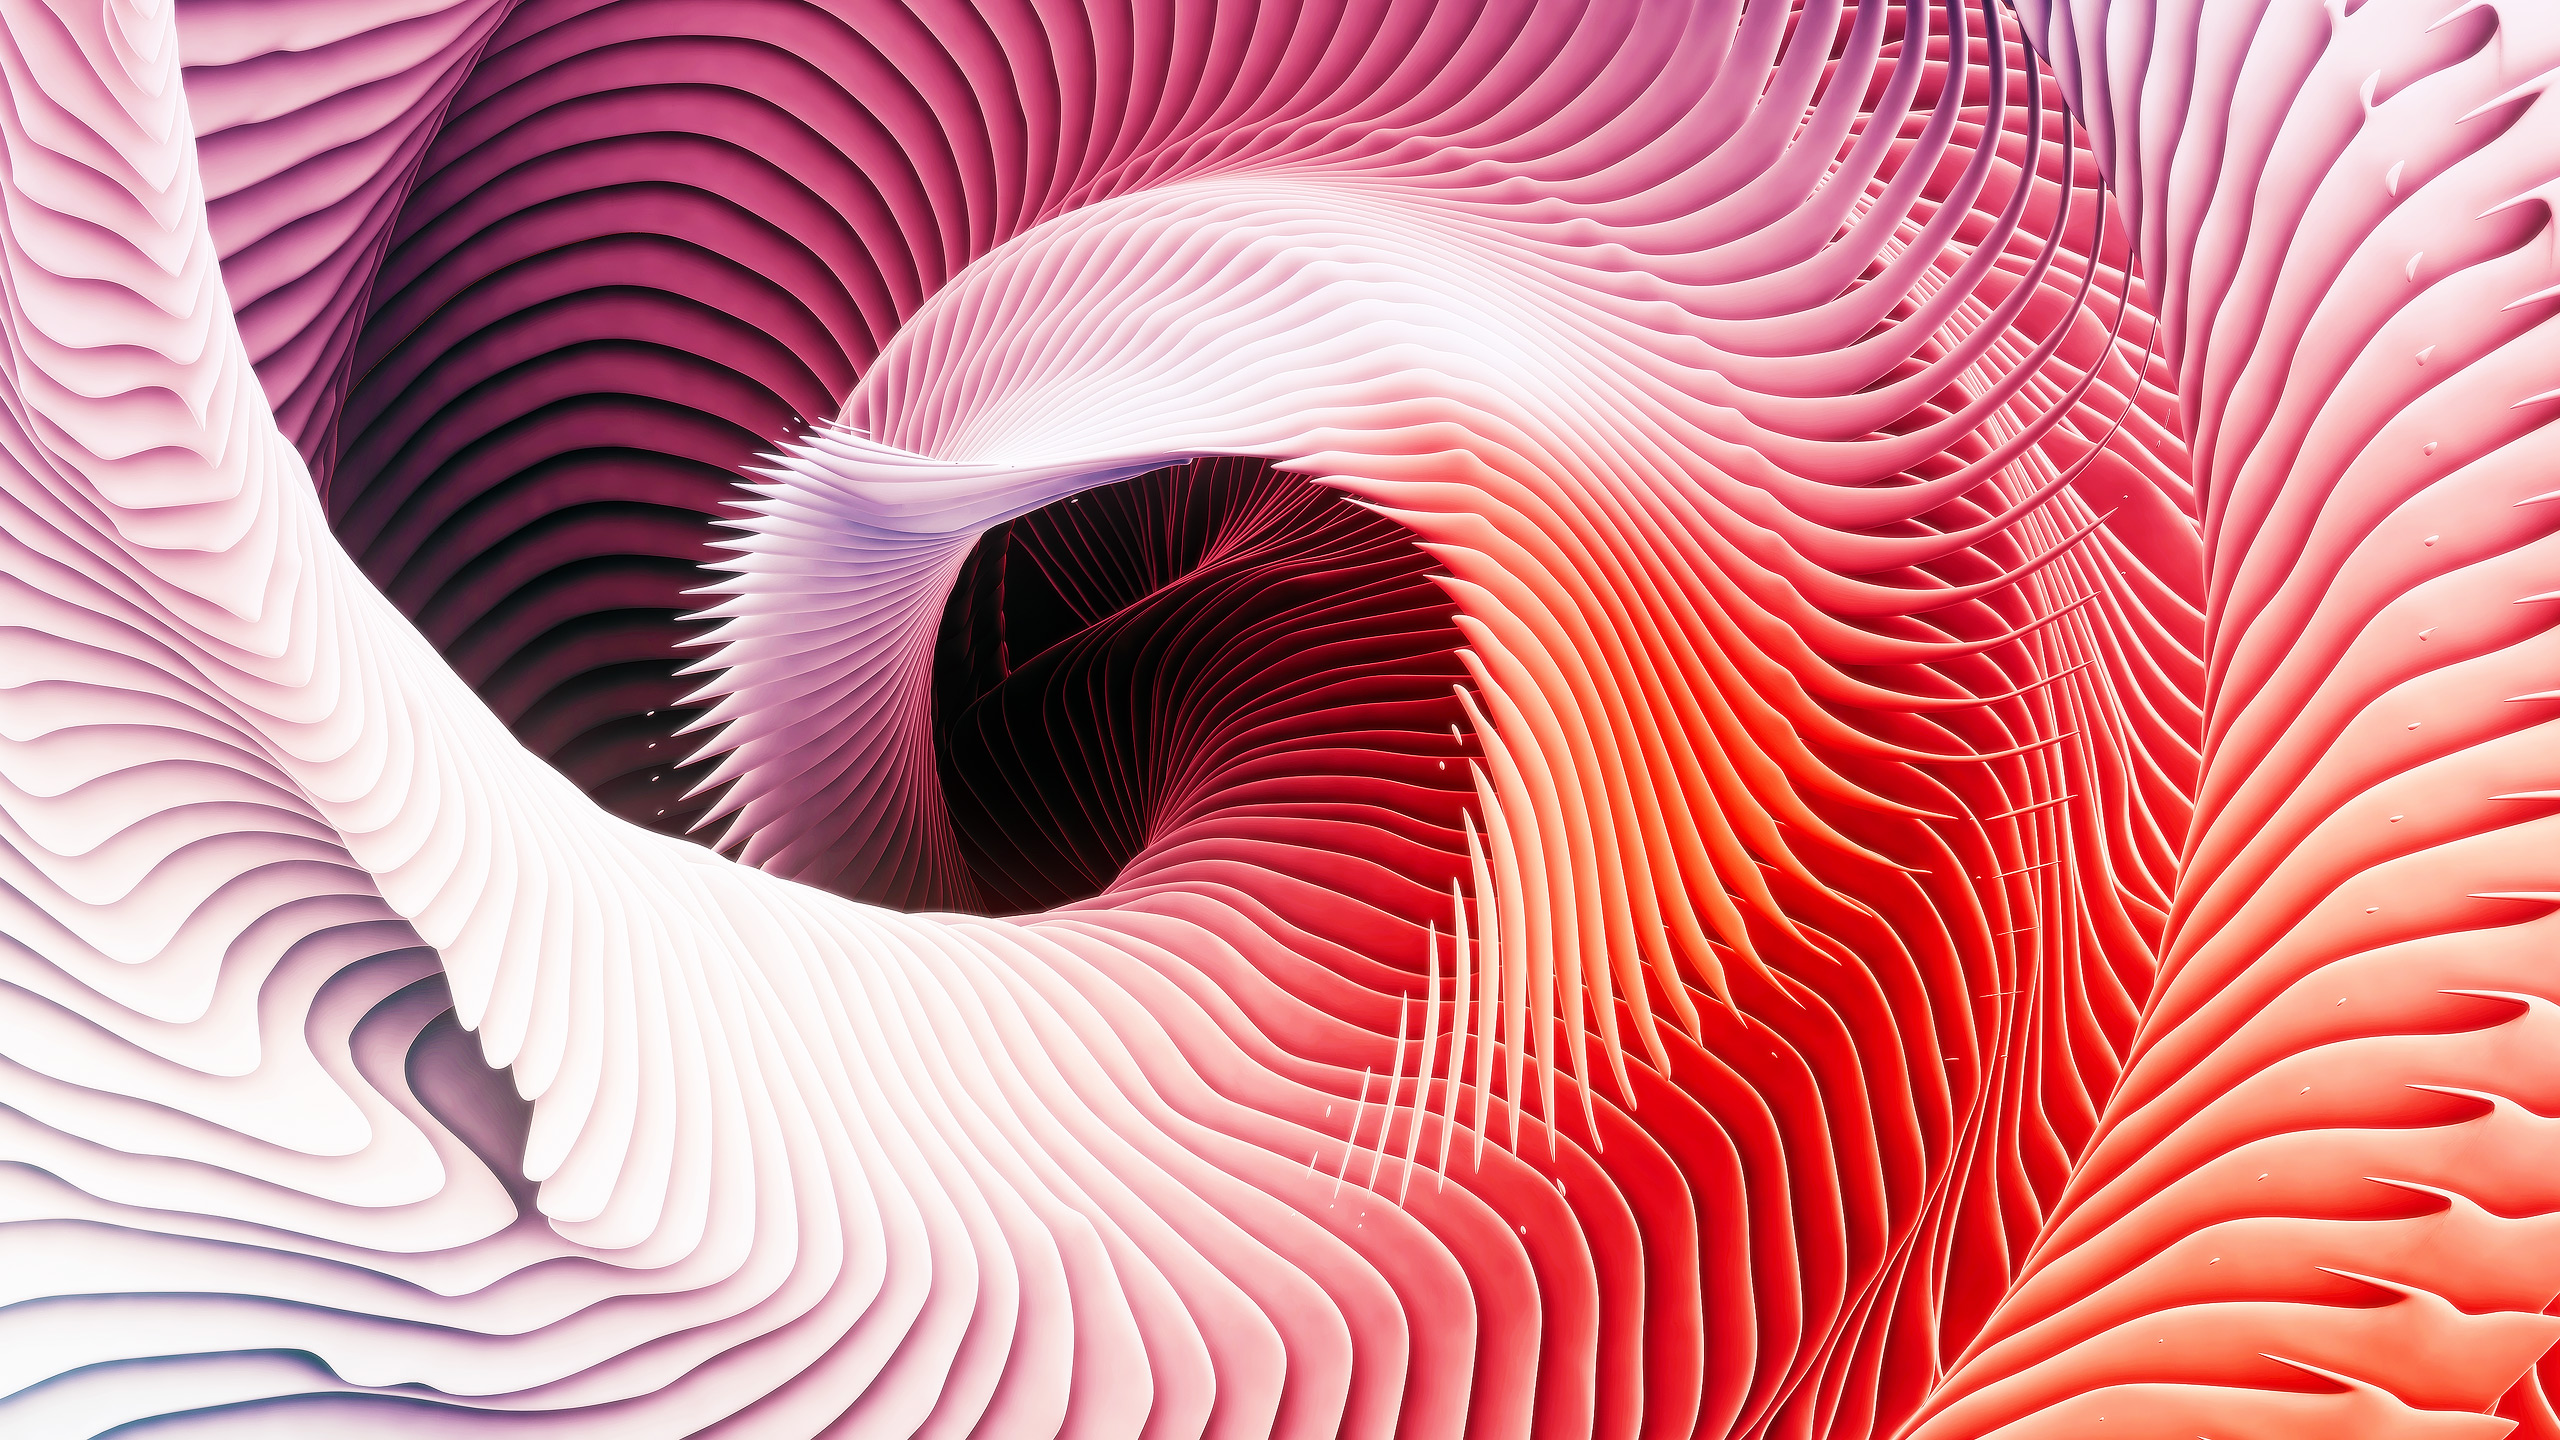 Ari Weinkle Abstract Spiral Colorful 2560x1440